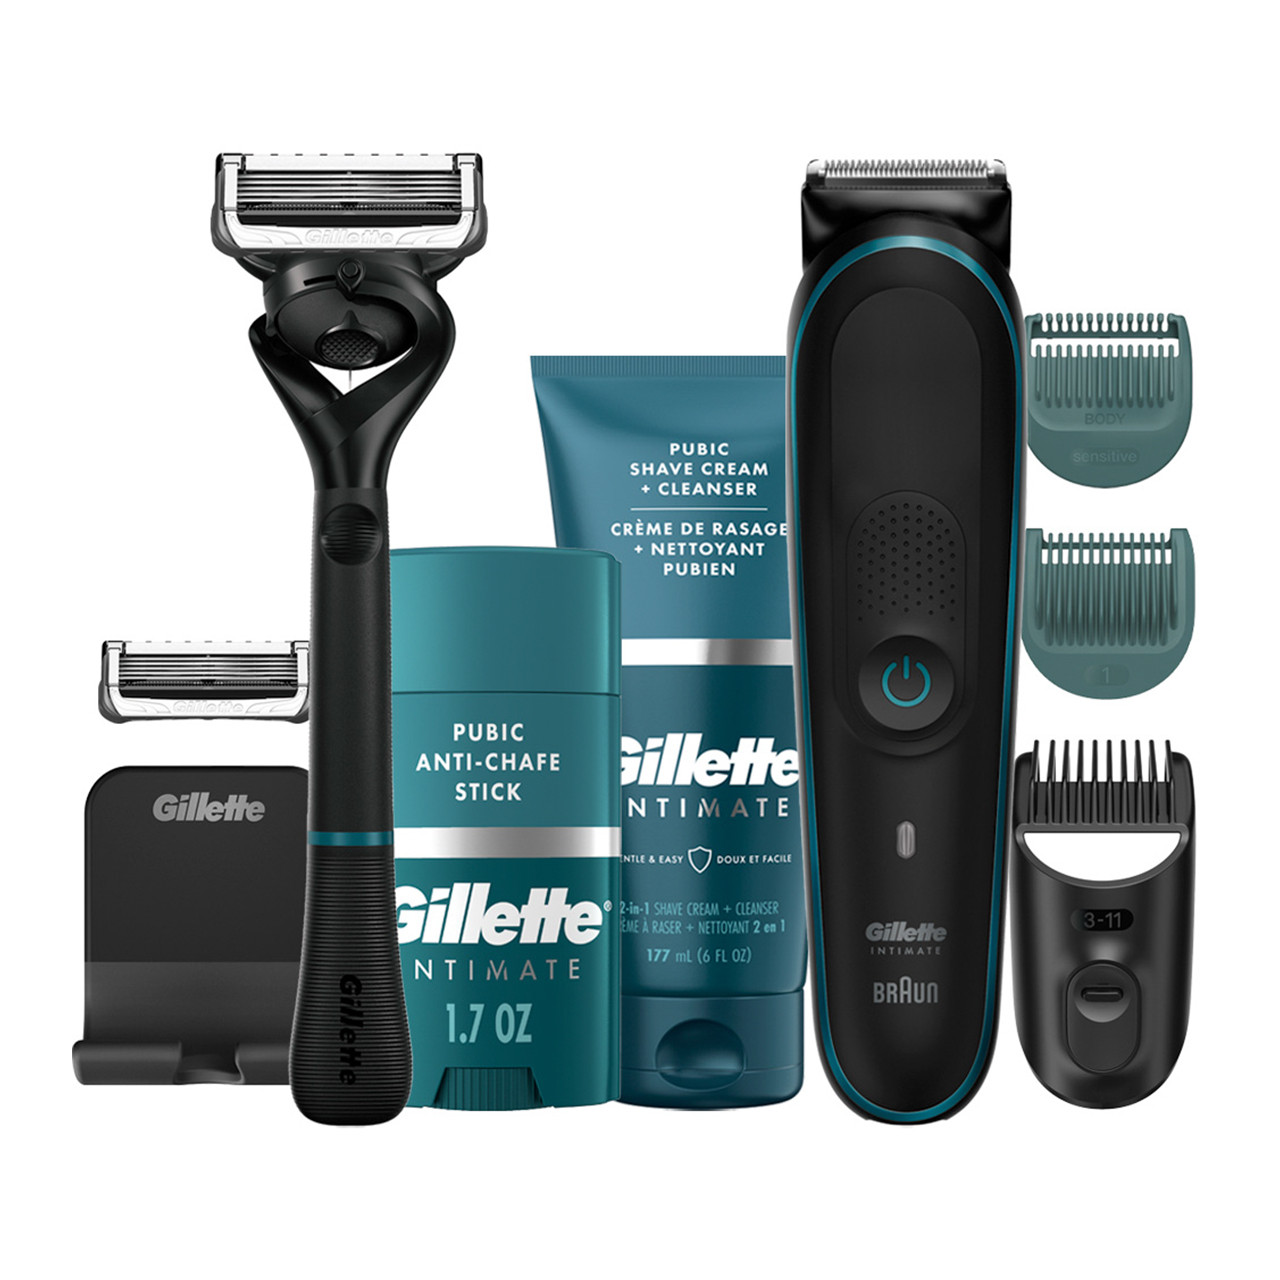 https://cdn11.bigcommerce.com/s-dukhrgn8mp/images/stencil/1280x1280/products/660/2541/1_Gillette_PDP_MIG_Essential_Kit_Carousel_1280x1280__25643.1673018502.jpg?c=2